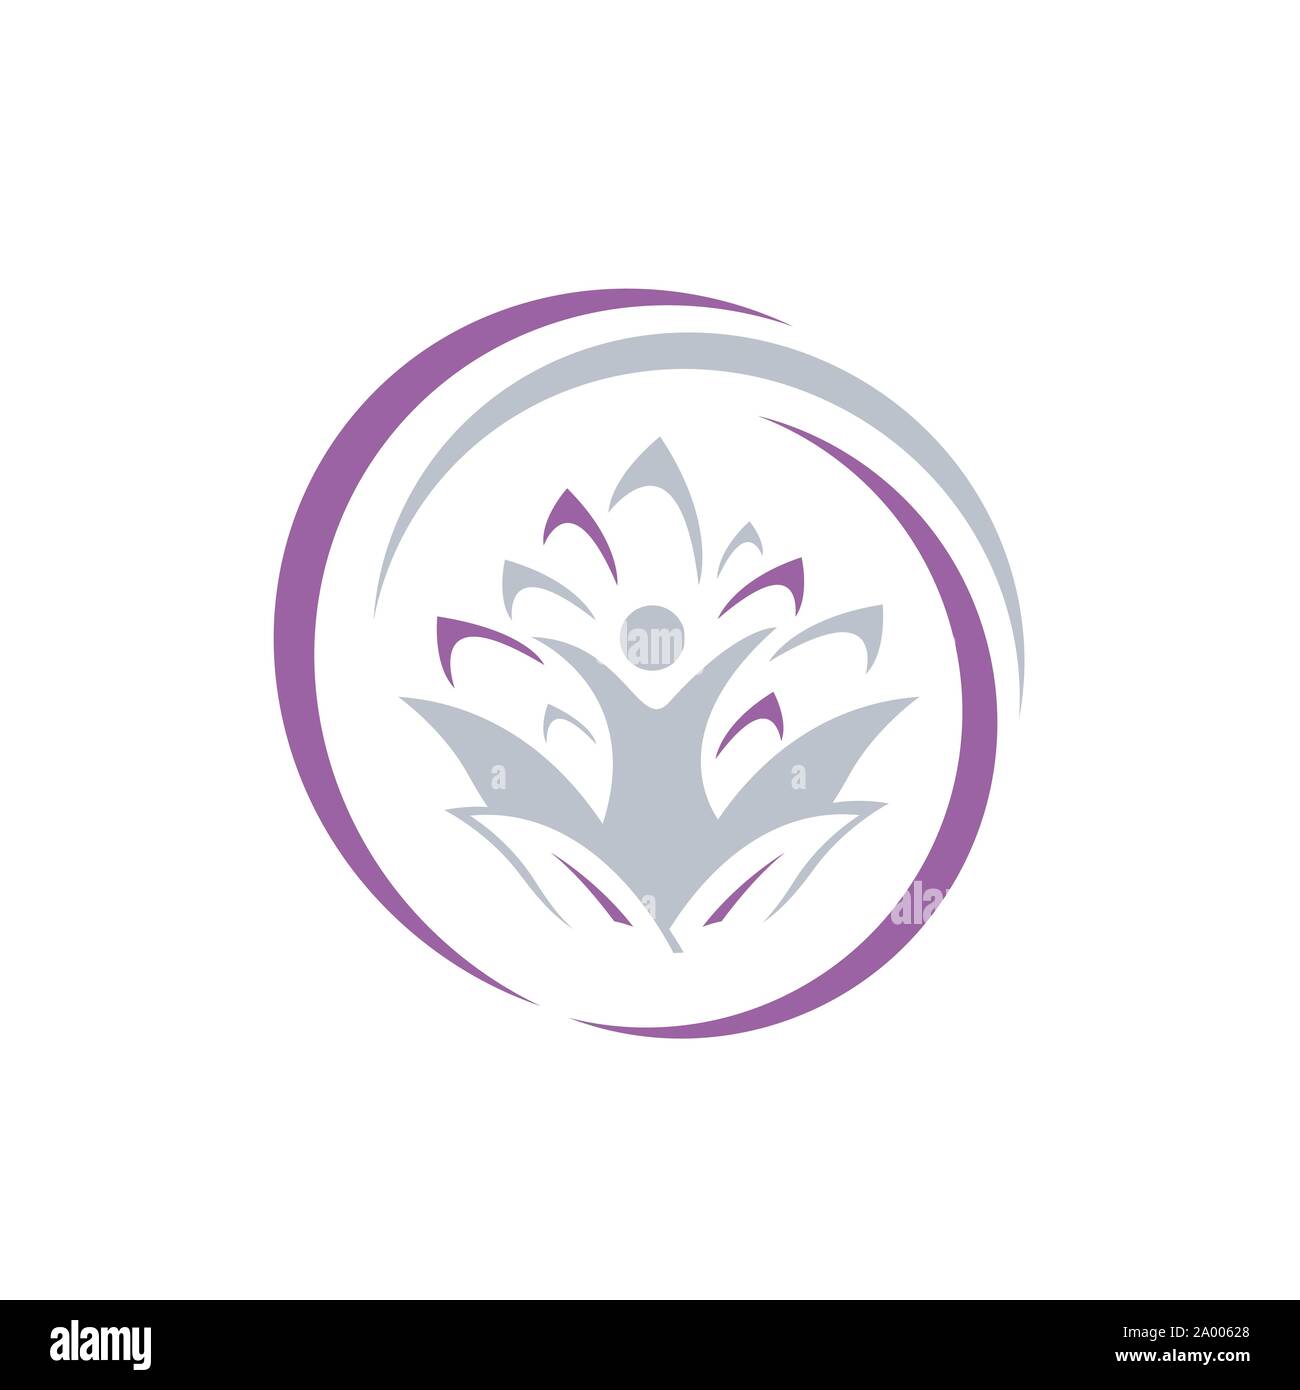 Abstract Lotus Flower and People Logo design vector yoga wellness Icon Elements Symbol Stock Vector